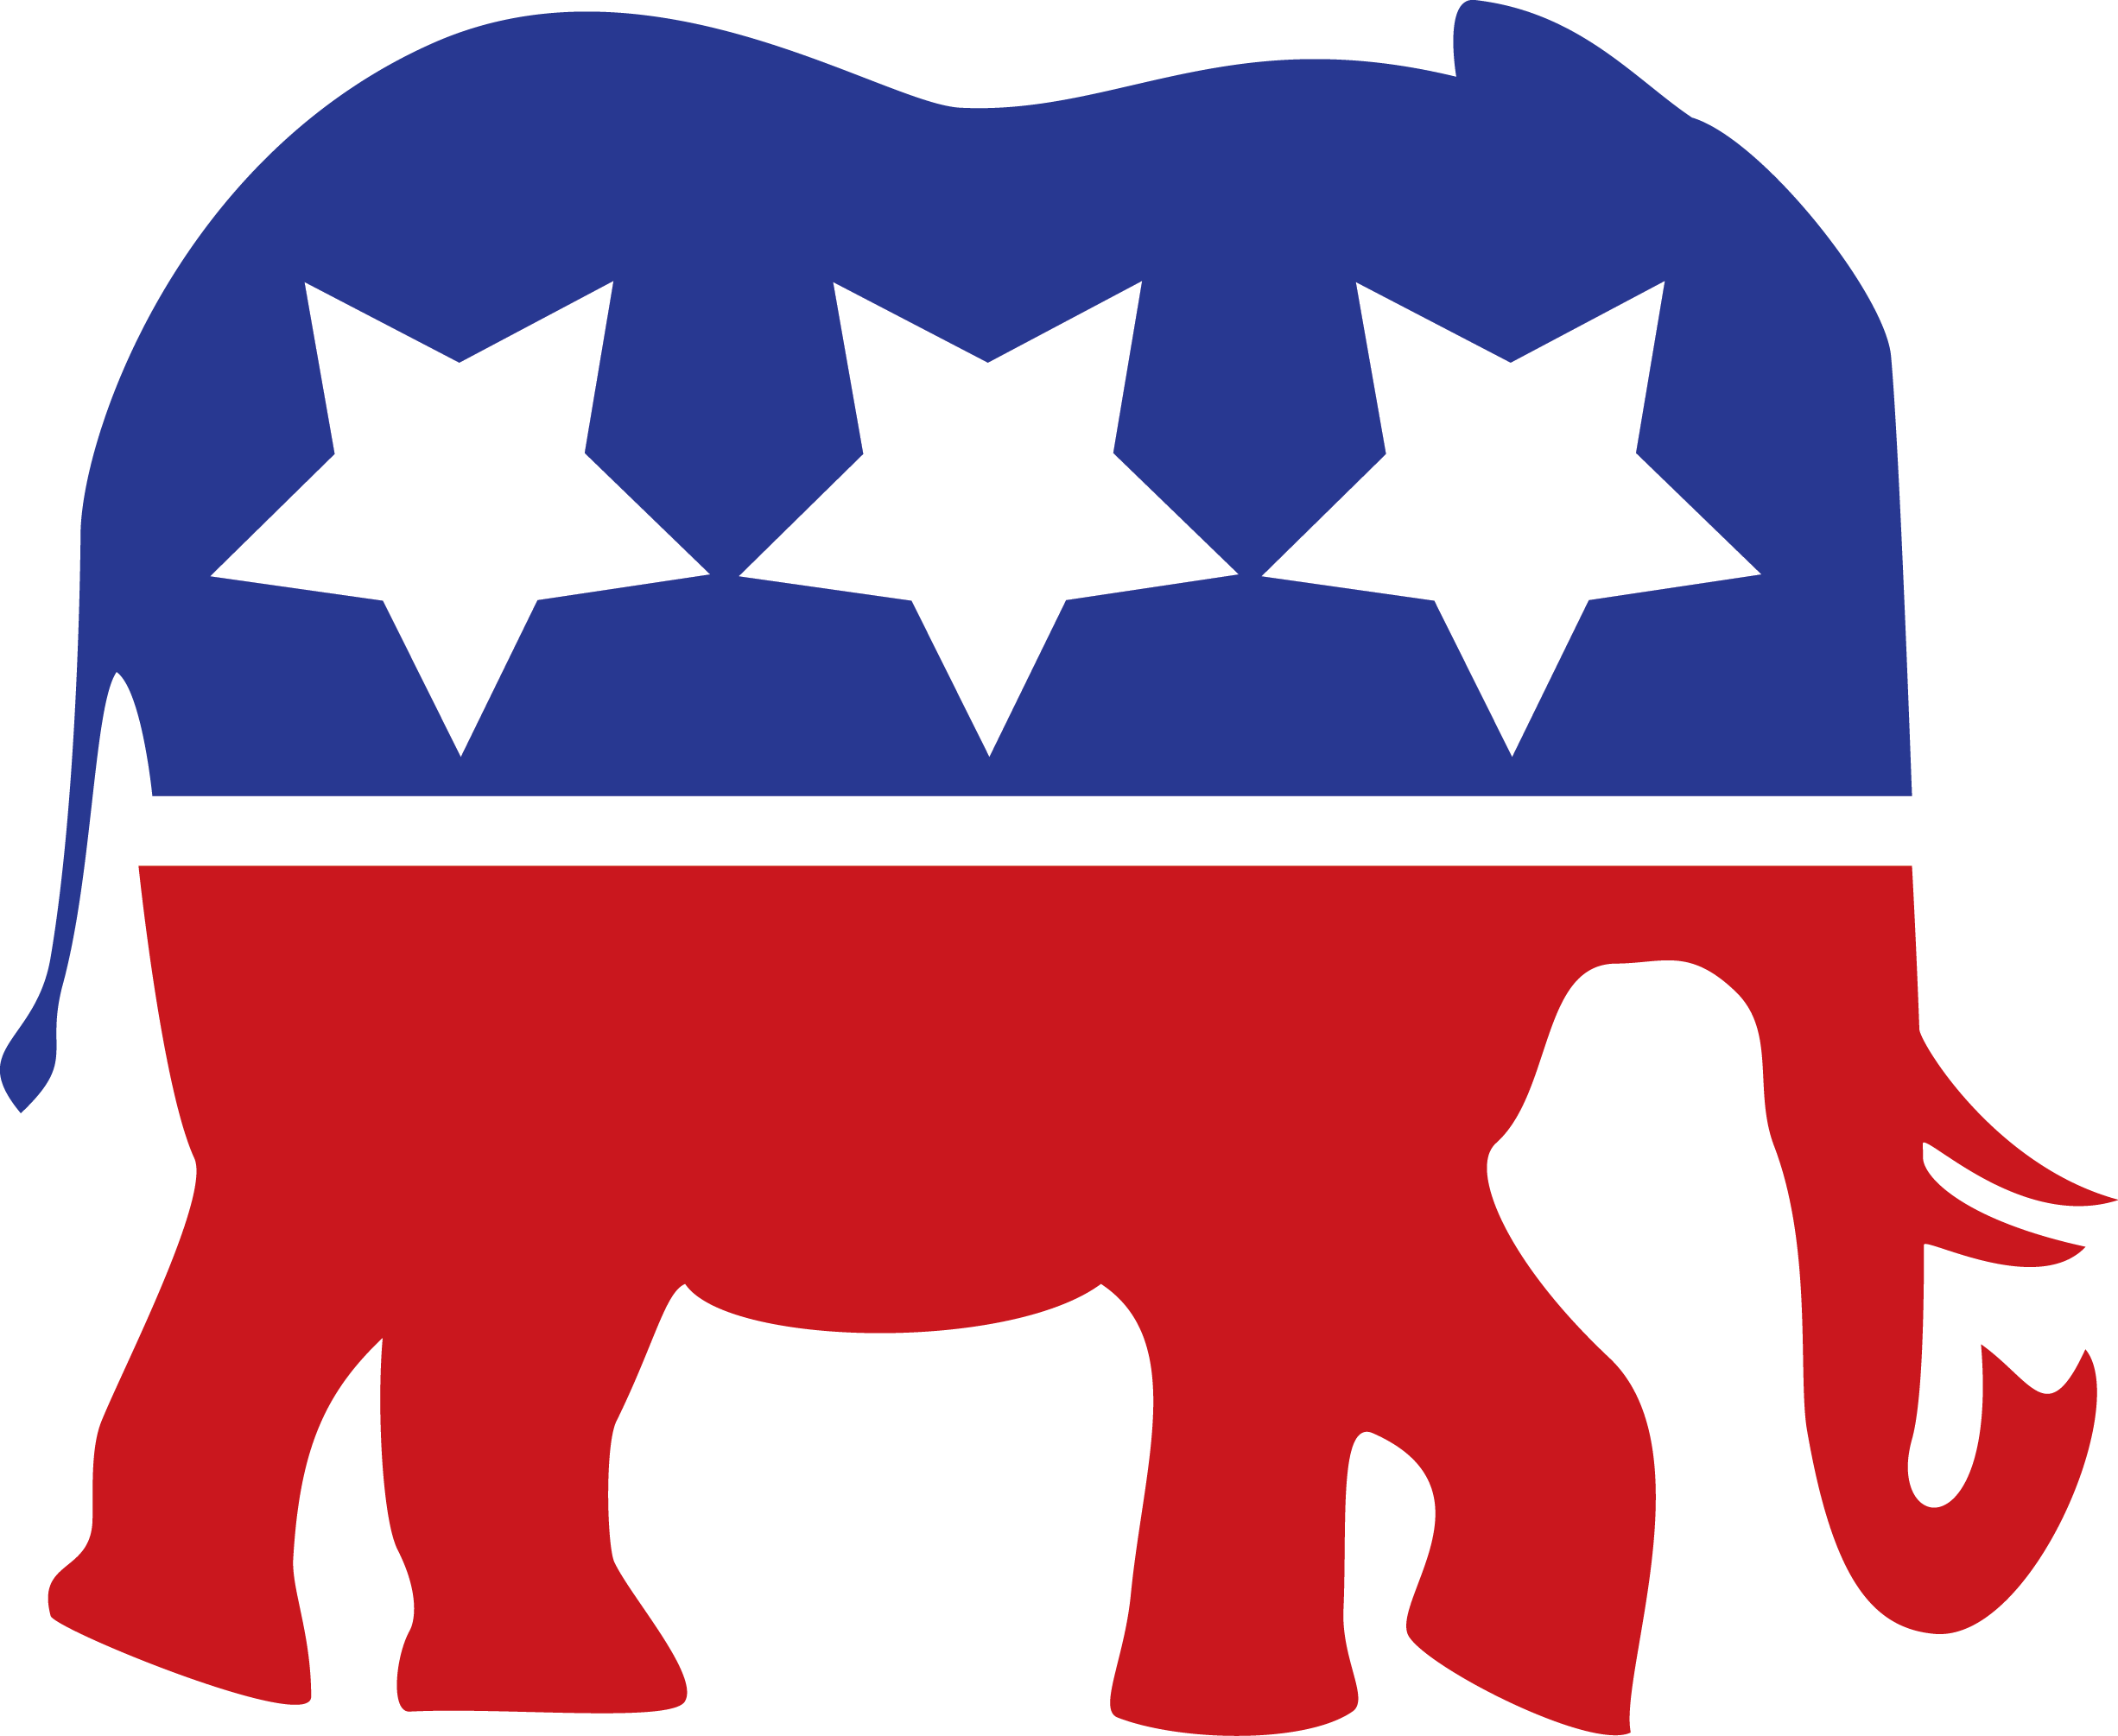 republican party logo | Logospike.com: Famous and Free Vector Logos